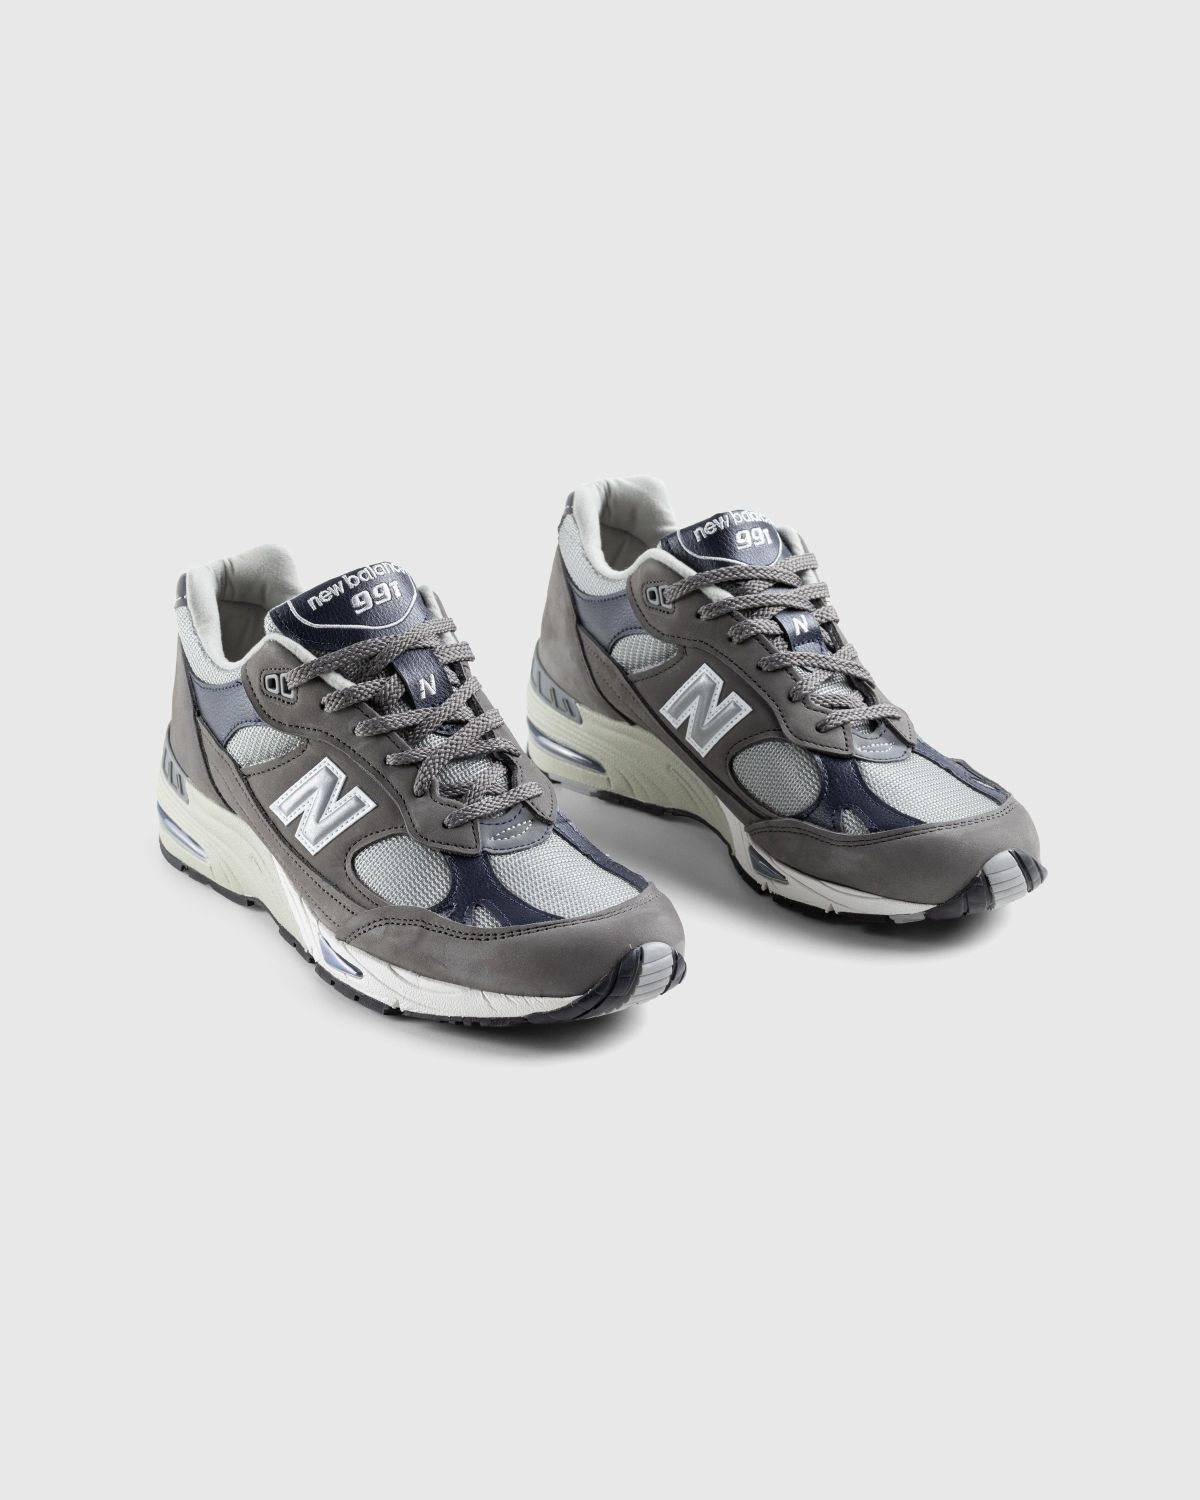 New Balance – M991GNS Grey/Navy - Low Top Sneakers - Grey - Image 3